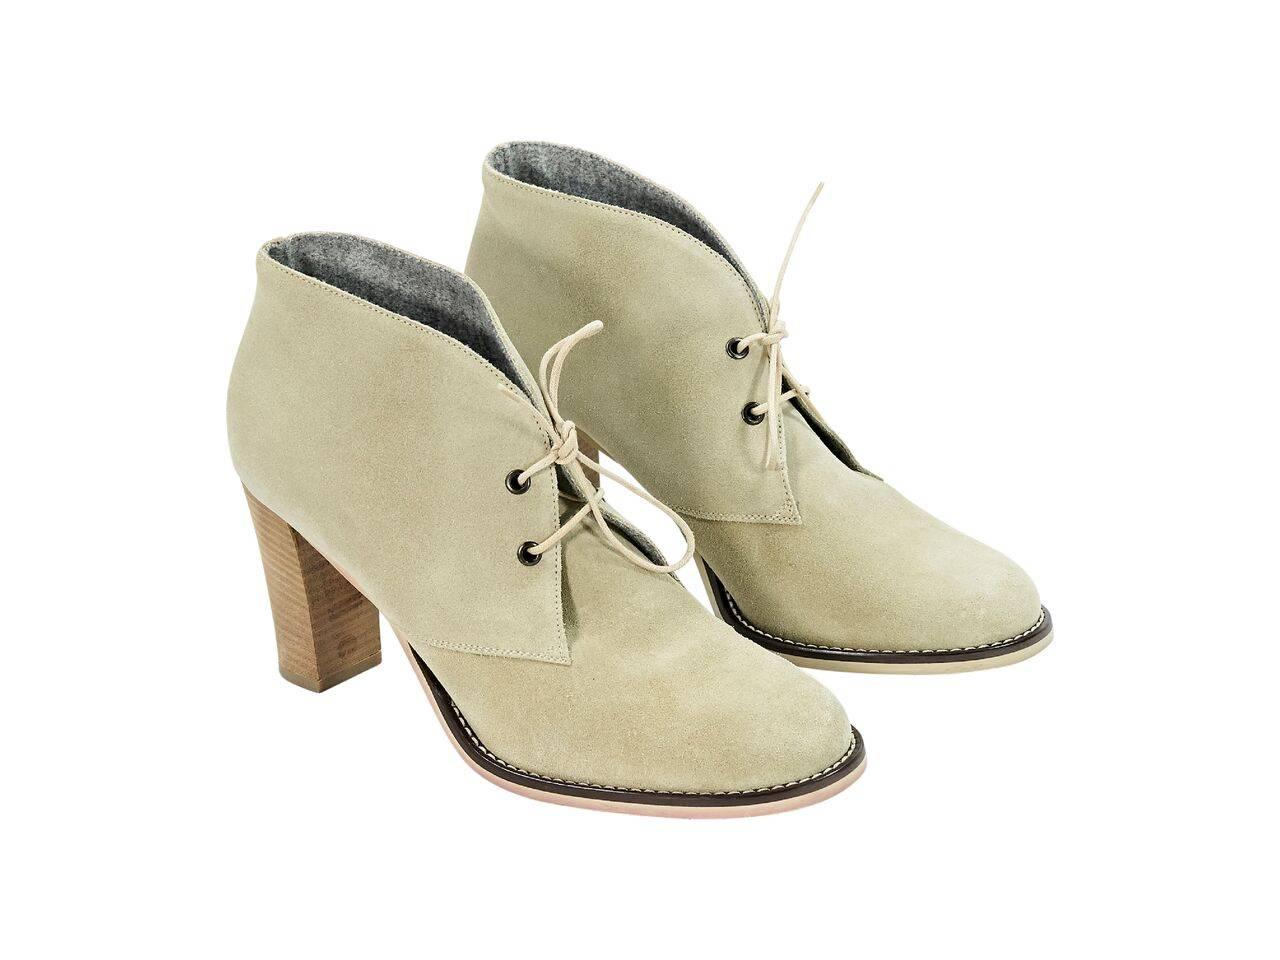 Product details:  Tan suede ankle boots by Brunello Cucinelli.  Lace-up closure.  Round toe.  Stacked block heel.  
Condition: Pre-owned. Very good.
Est. Retail $ 1,028.00